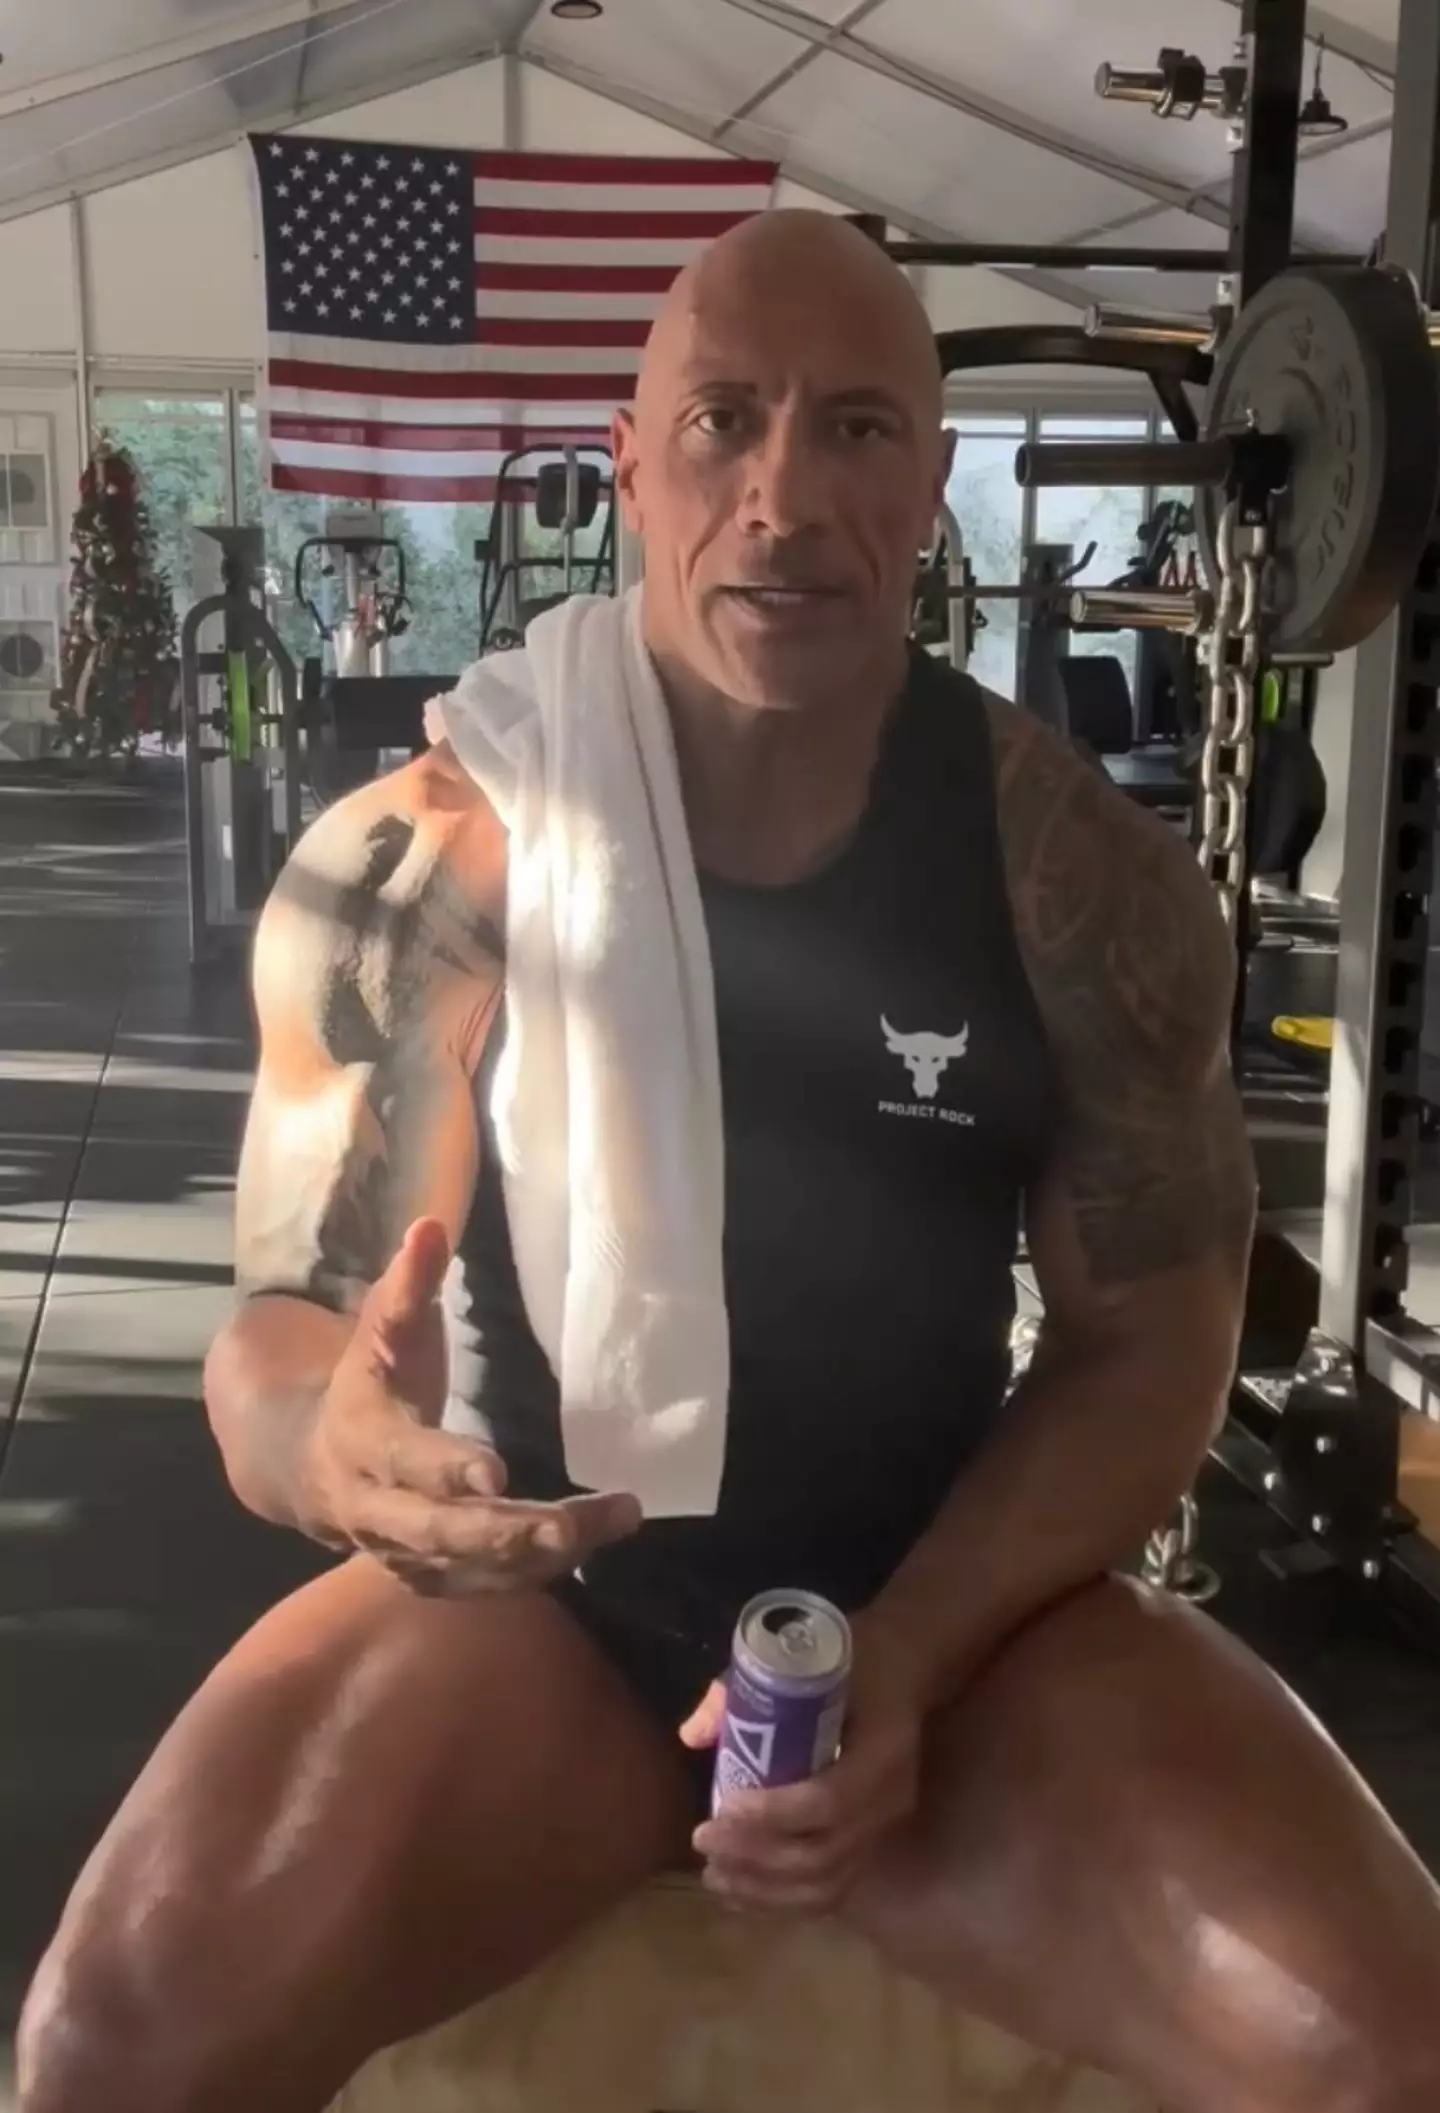 The Rock admitted he relieves himself in bottles while at the gym.